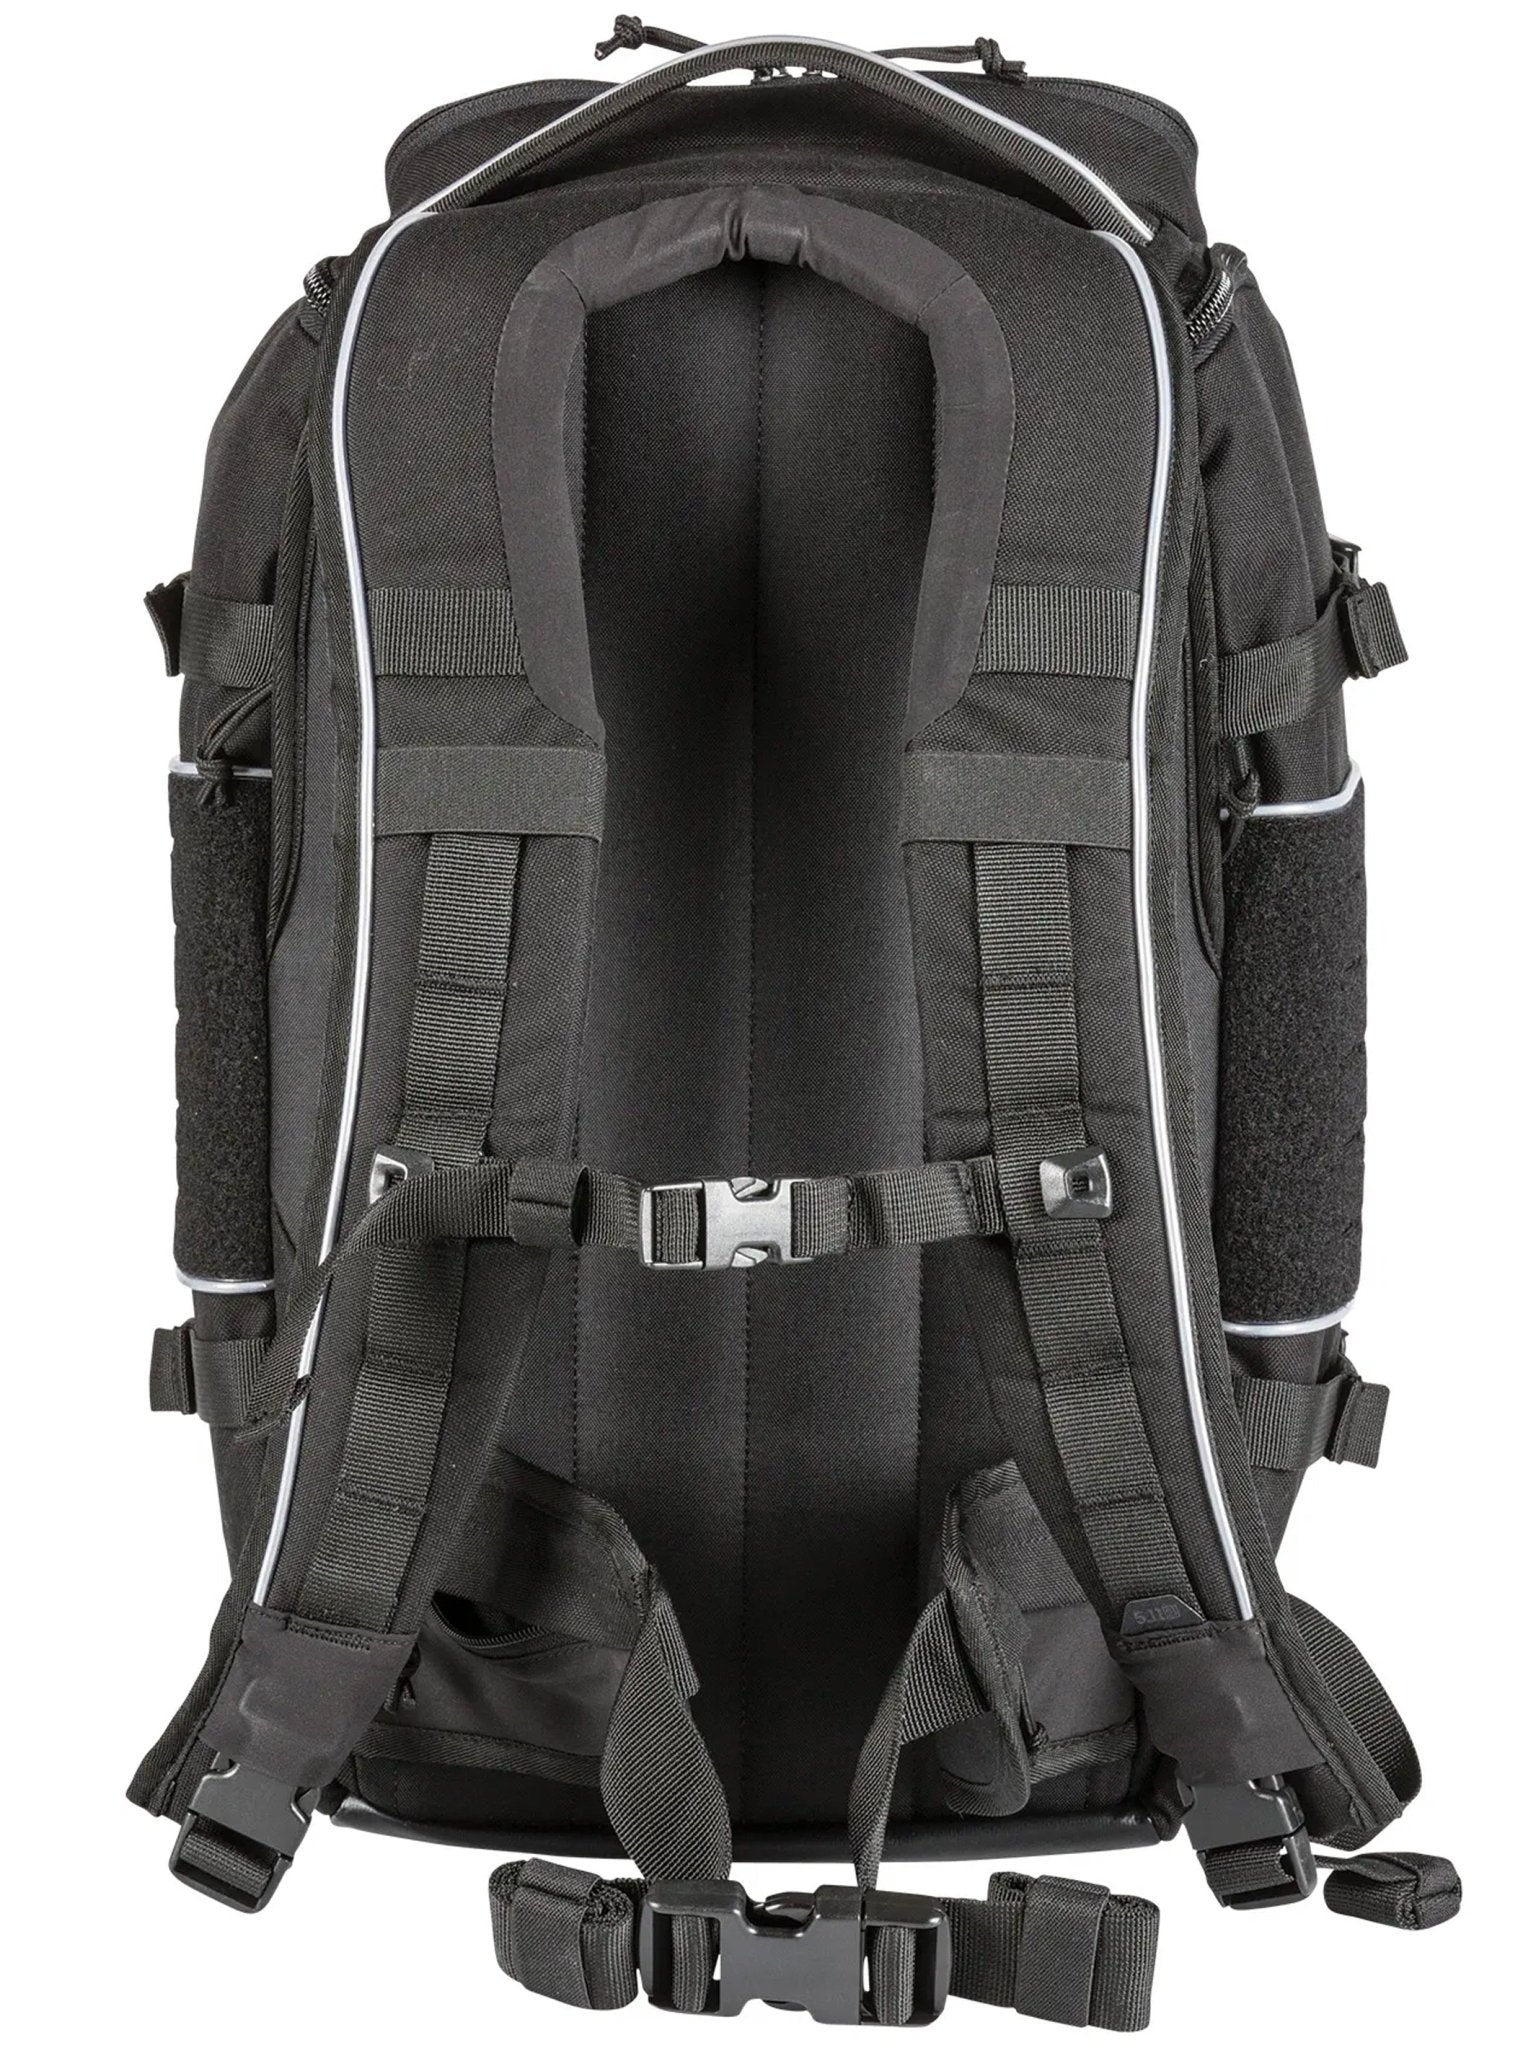 4elementsclothing5.11 Tactical5.11 Tactical - 5.11 OPERATOR ALS BACKPACK 35L 1000D Nylon - Style 56395Bag56395-019